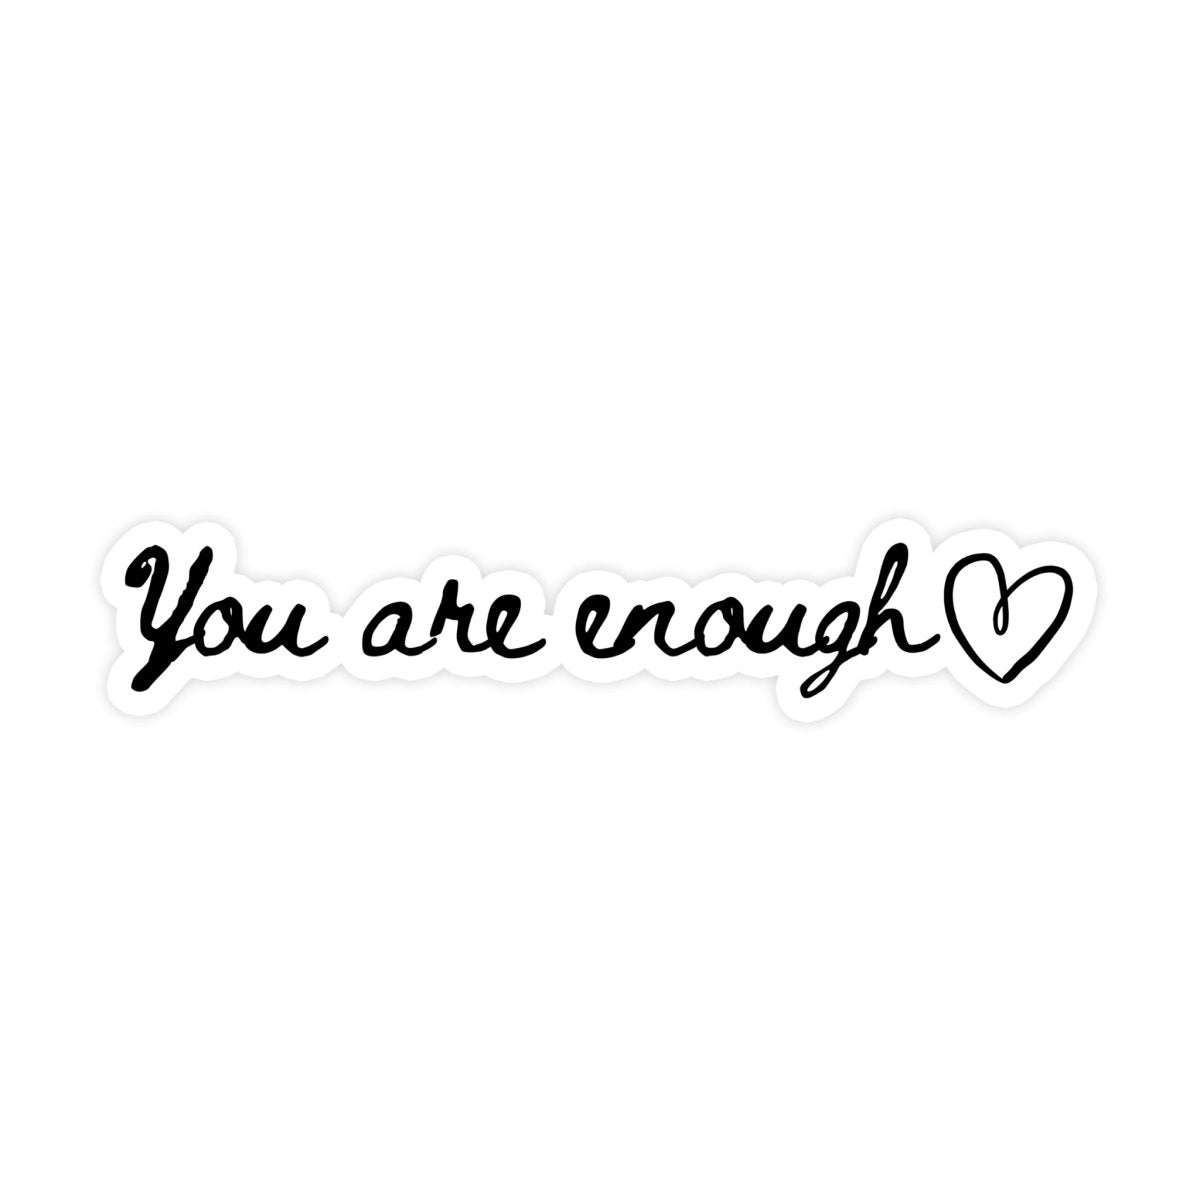 You Are Enough Mental Health Heart Sticker - stickerbullYou Are Enough Mental Health Heart StickerRetail StickerstickerbullstickerbullTaylor_YouAreEnough [#172]You Are Enough Mental Health Heart Sticker